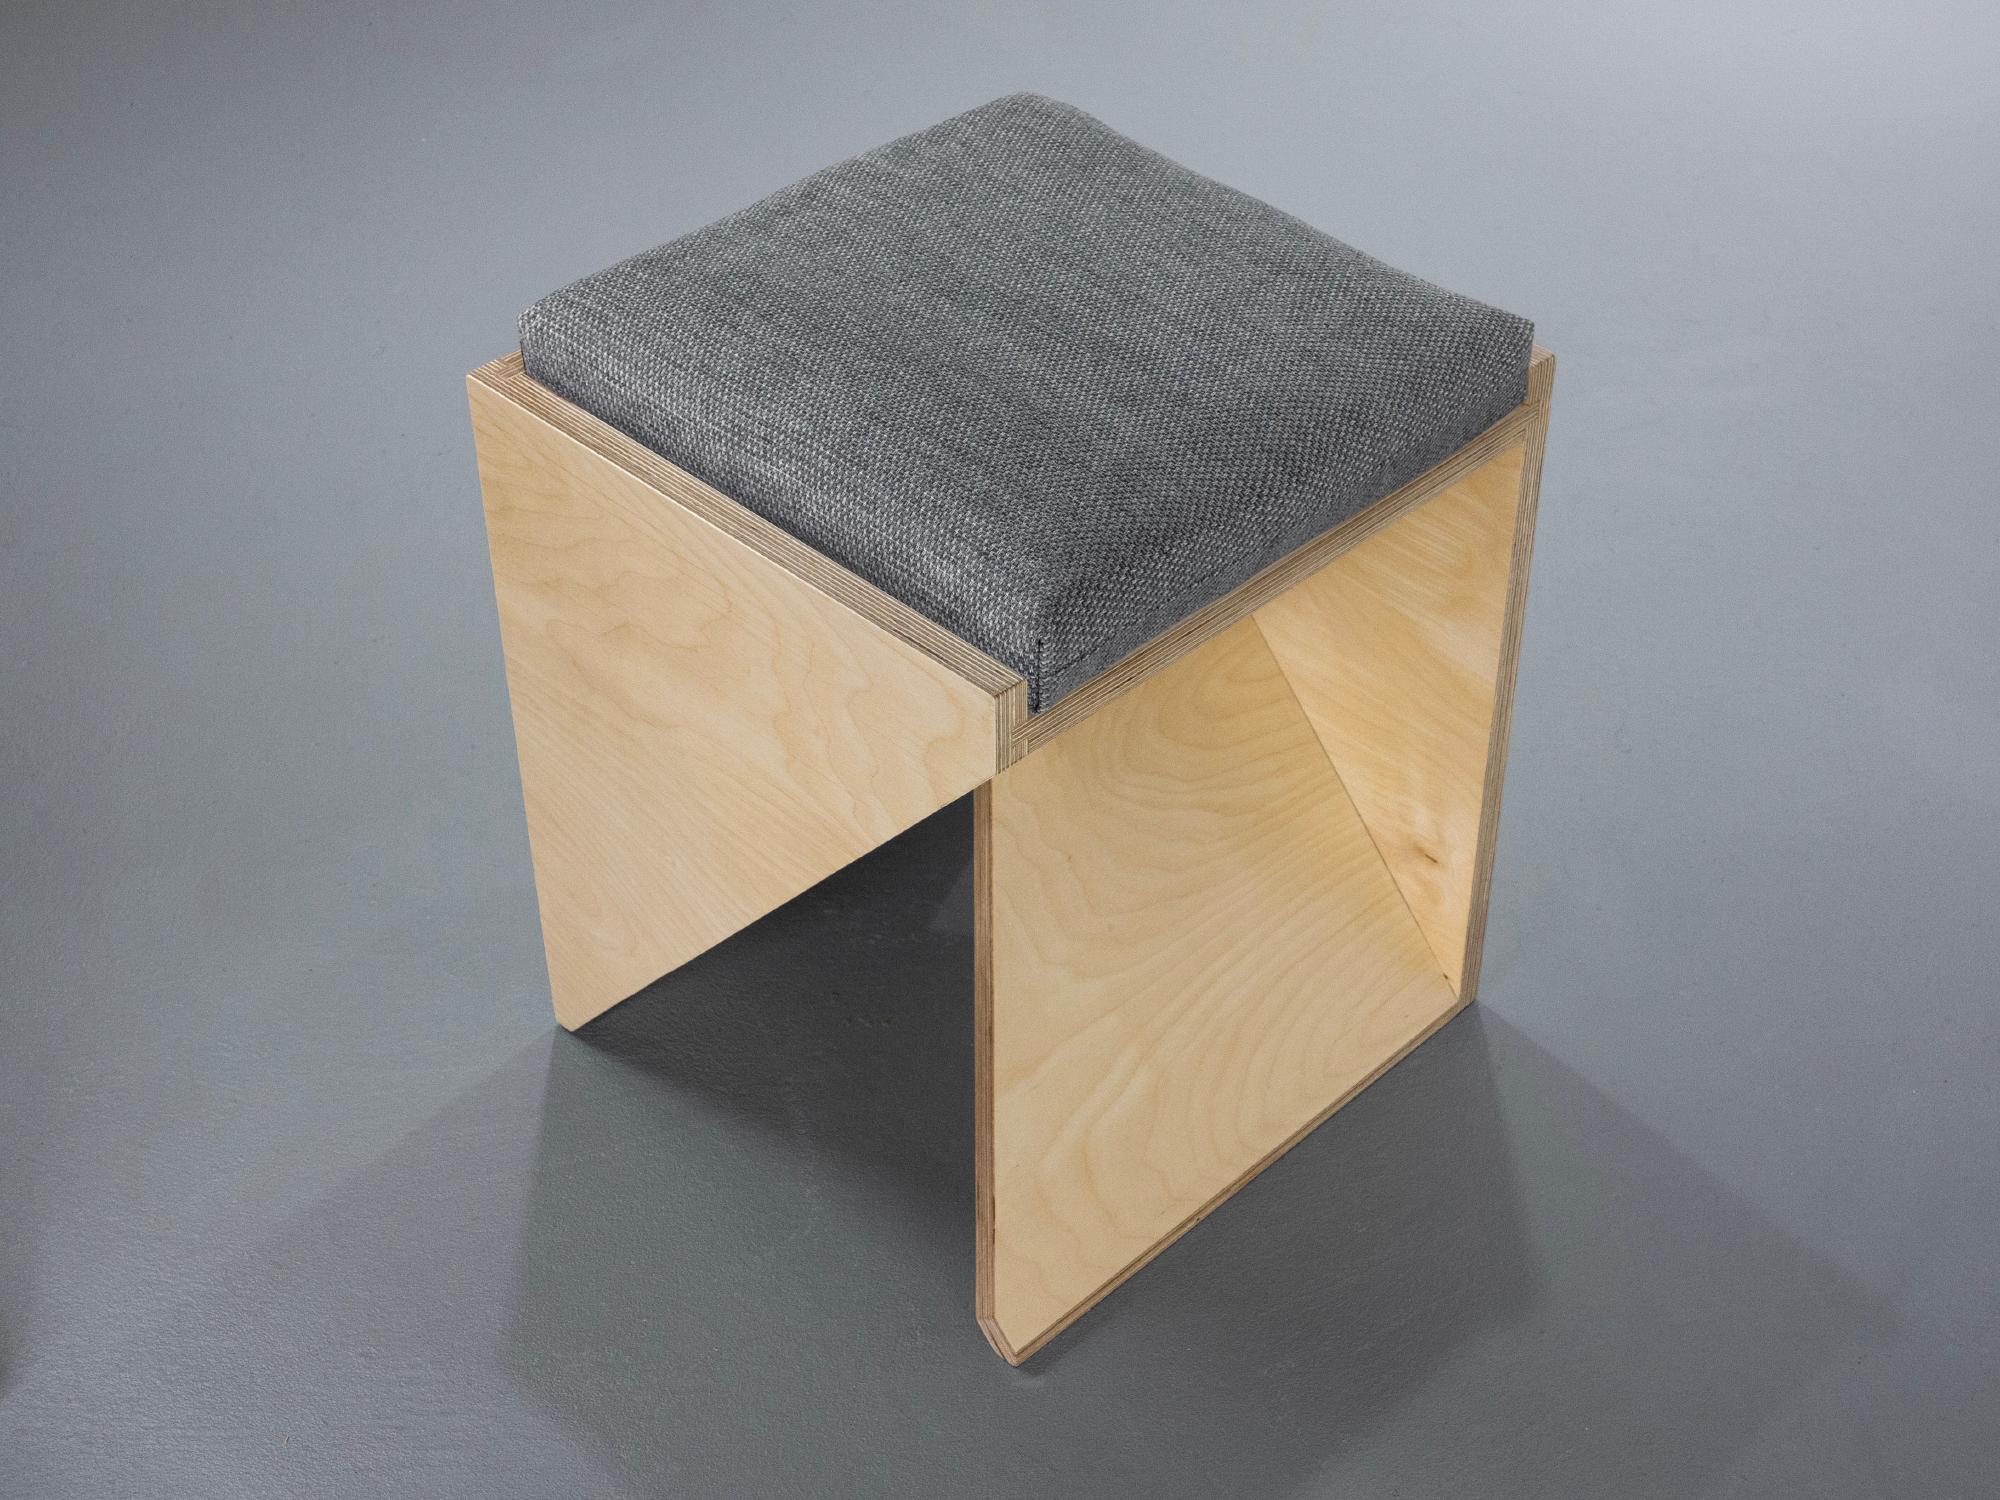 The Stool is made from premium Baltic Birch Plywood. Its legs are formed by two folded prisms that lock together in the center. The stool is both functional and sculptural, changing shape depending on the angle of view. It includes a 16 x 16” cotton